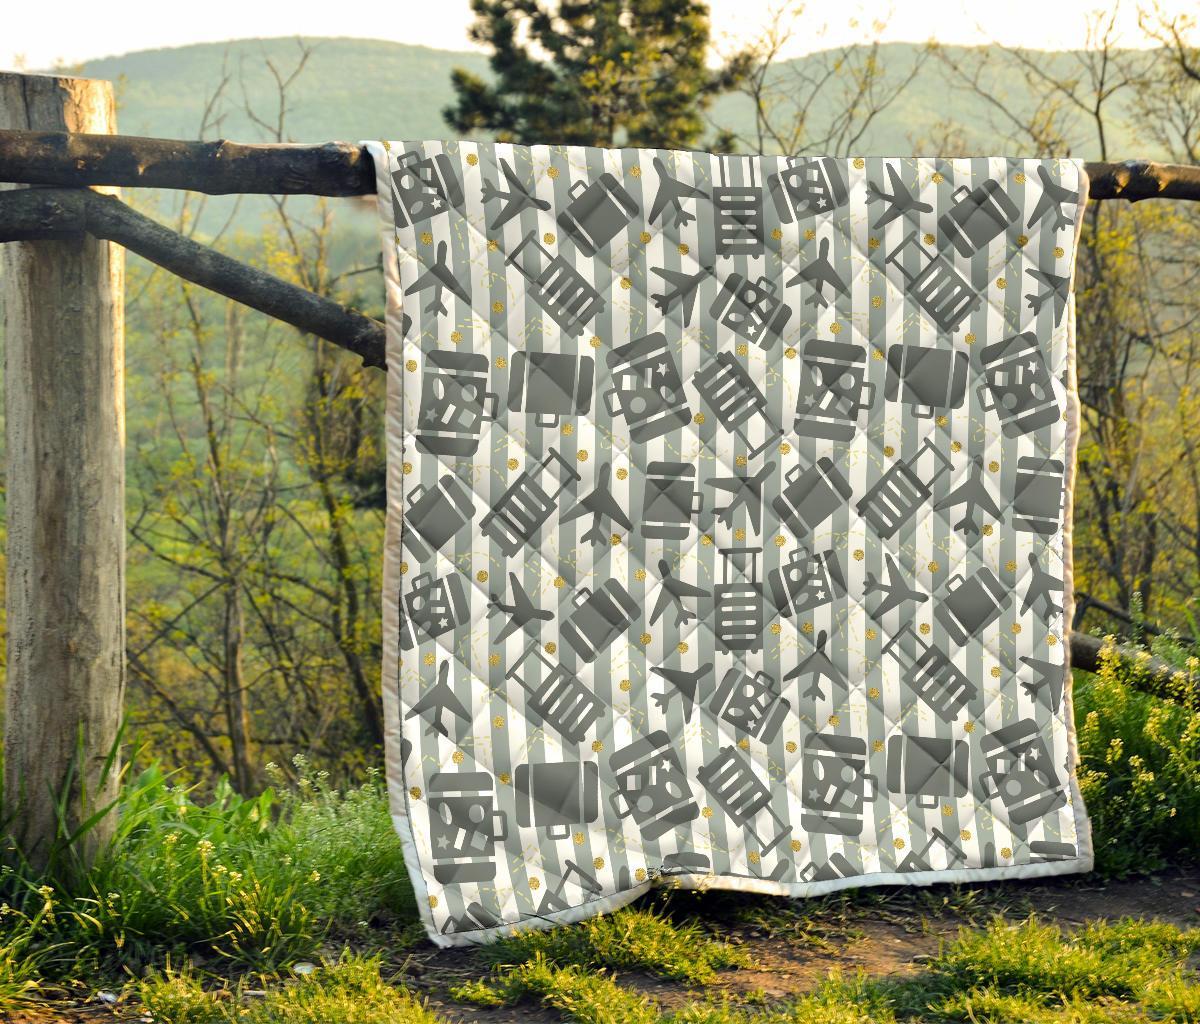 Airplane Luggage Pattern Print Quilt-grizzshop